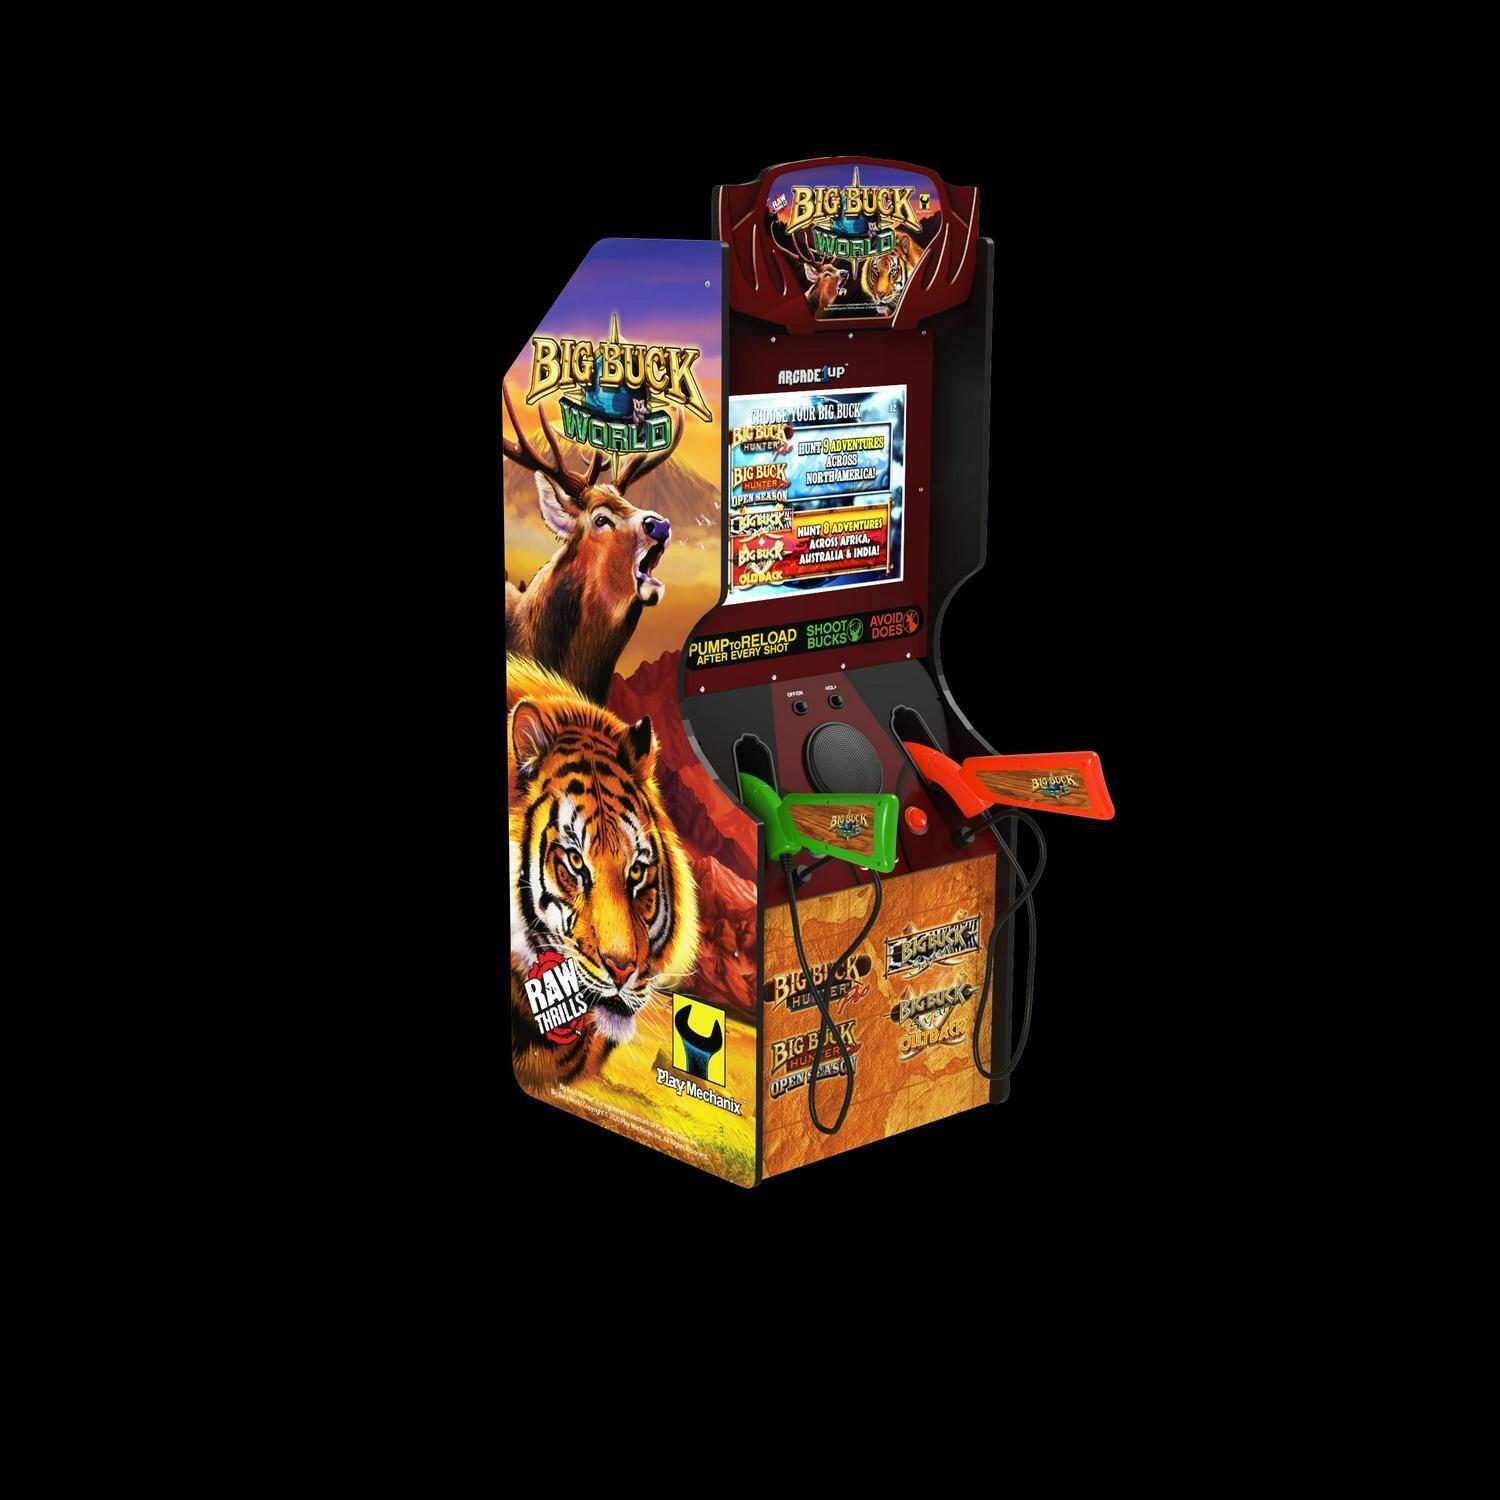 Arcade1Up Big Buck World Classic Arcade Machine, built for your home, stand-up 4